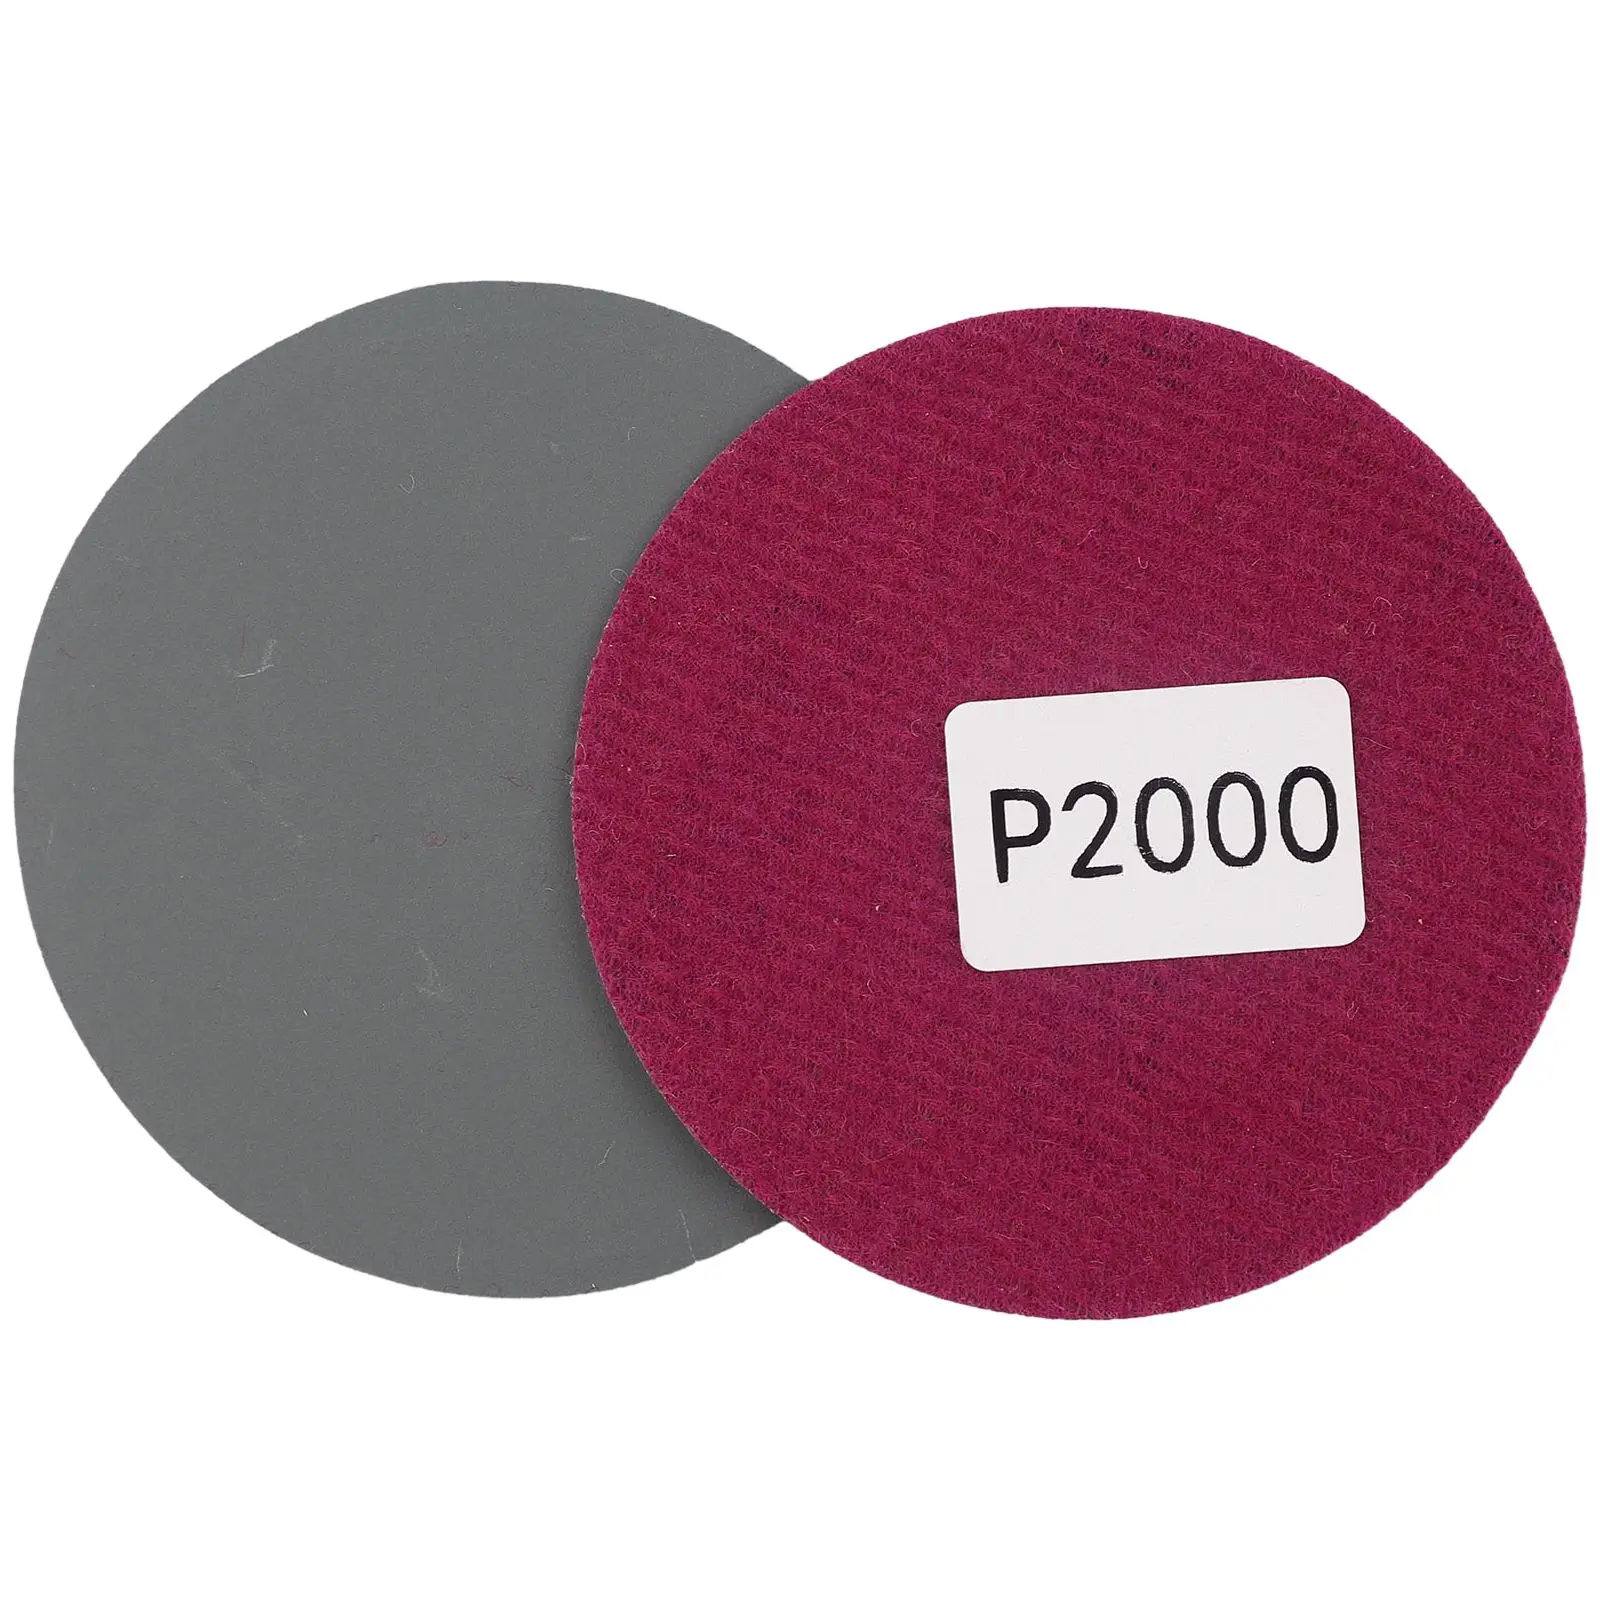 

Sand paper Sanding Disc Wet/Dry 1000 1500 2000 3000 5000 Grit 3inch Hook&Loop No Hole Paper Polishing Round Accessories